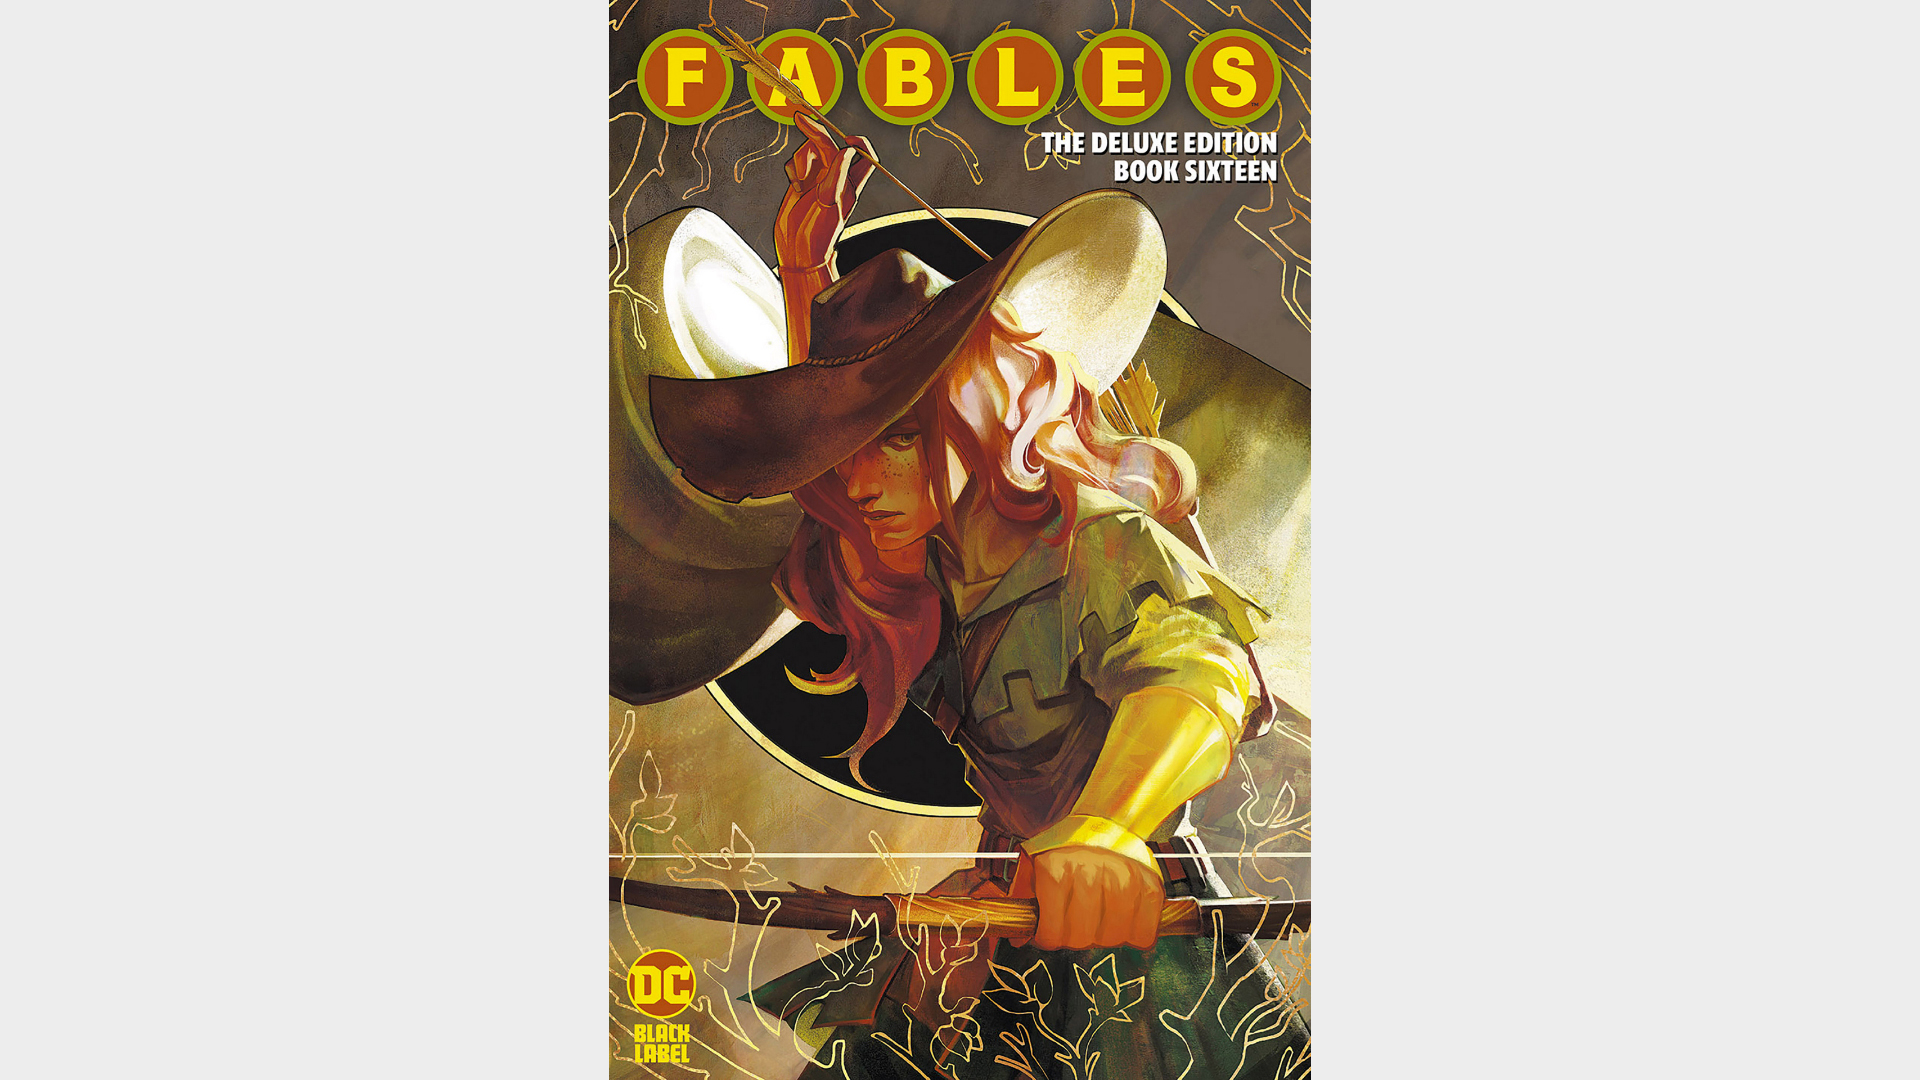 FABLES: DIE DELUXE EDITION BUCH SECHZEHN